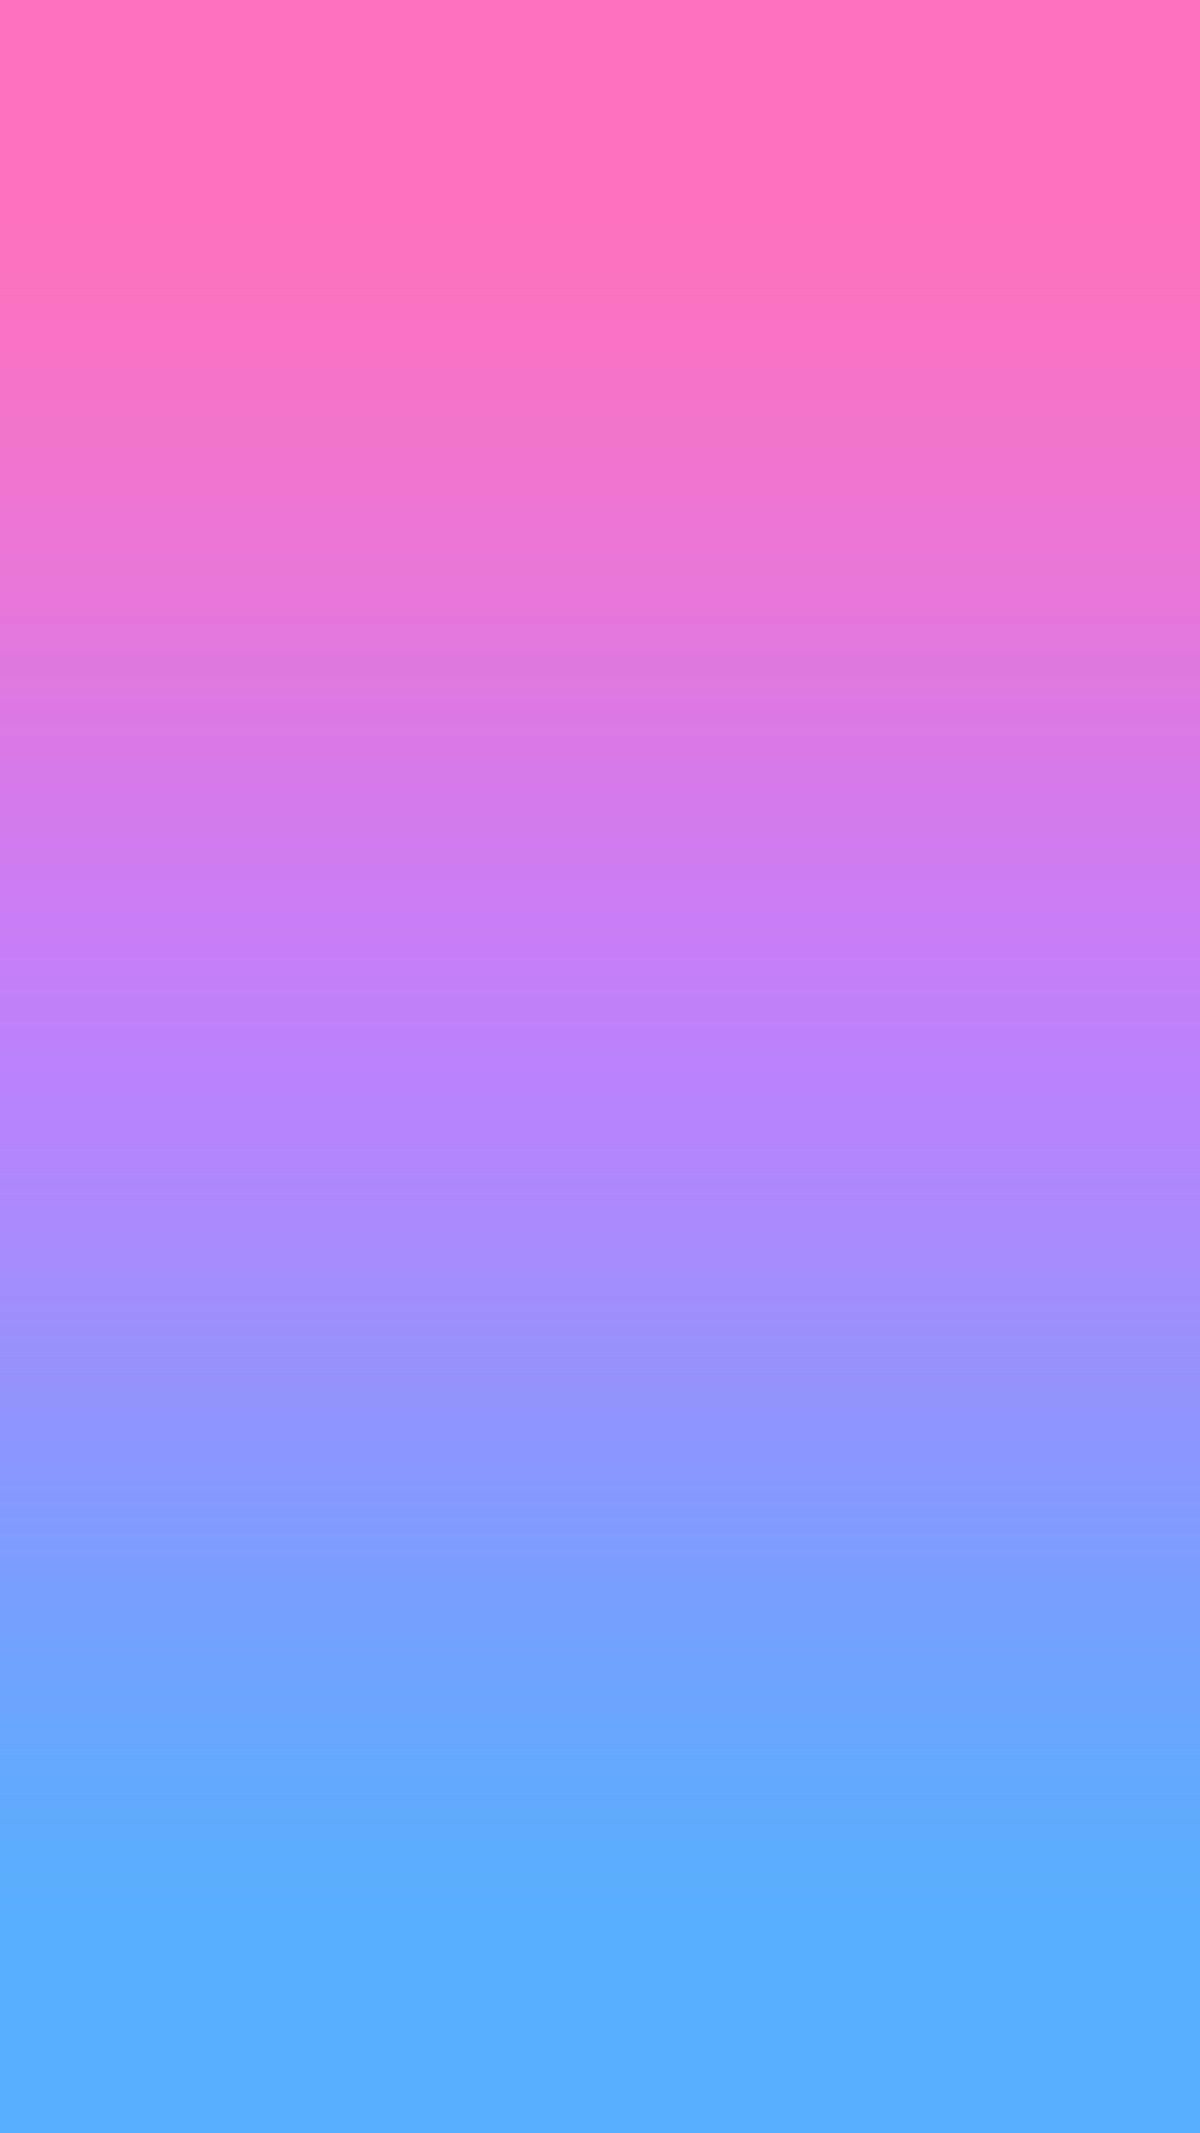 Blue Pink Purple. Ombre wallpaper iphone, Pink ombre wallpaper, Purple ombre wallpaper